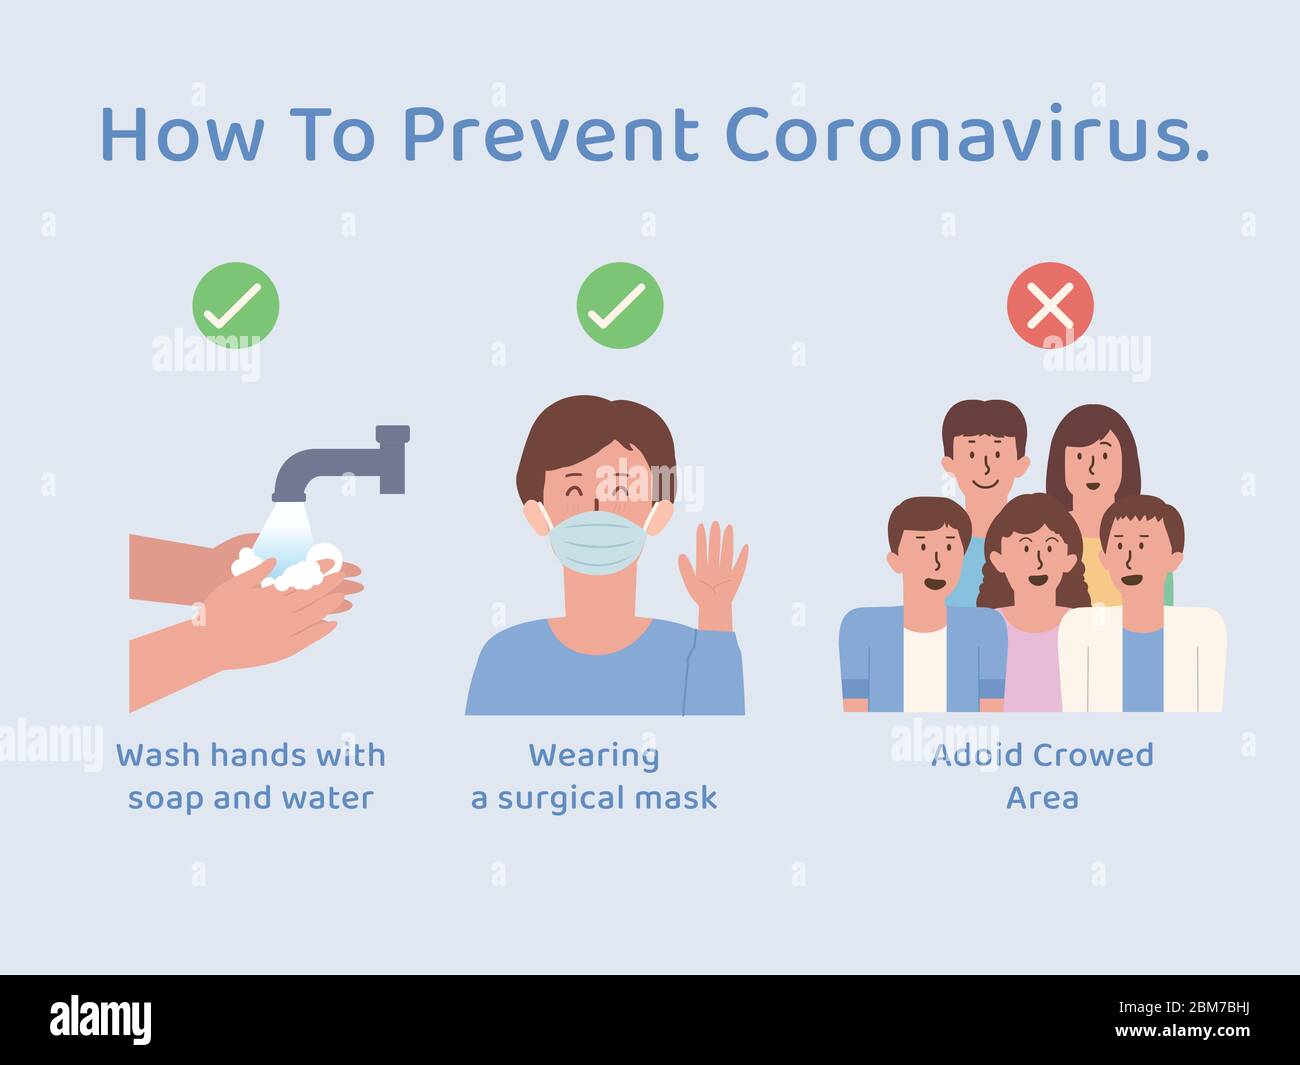 How to prevent Coronavirus with Wash hands, wear a hygiene mask and social distancing. Illustration about way to protection your self from Covid-19. Stock Vector